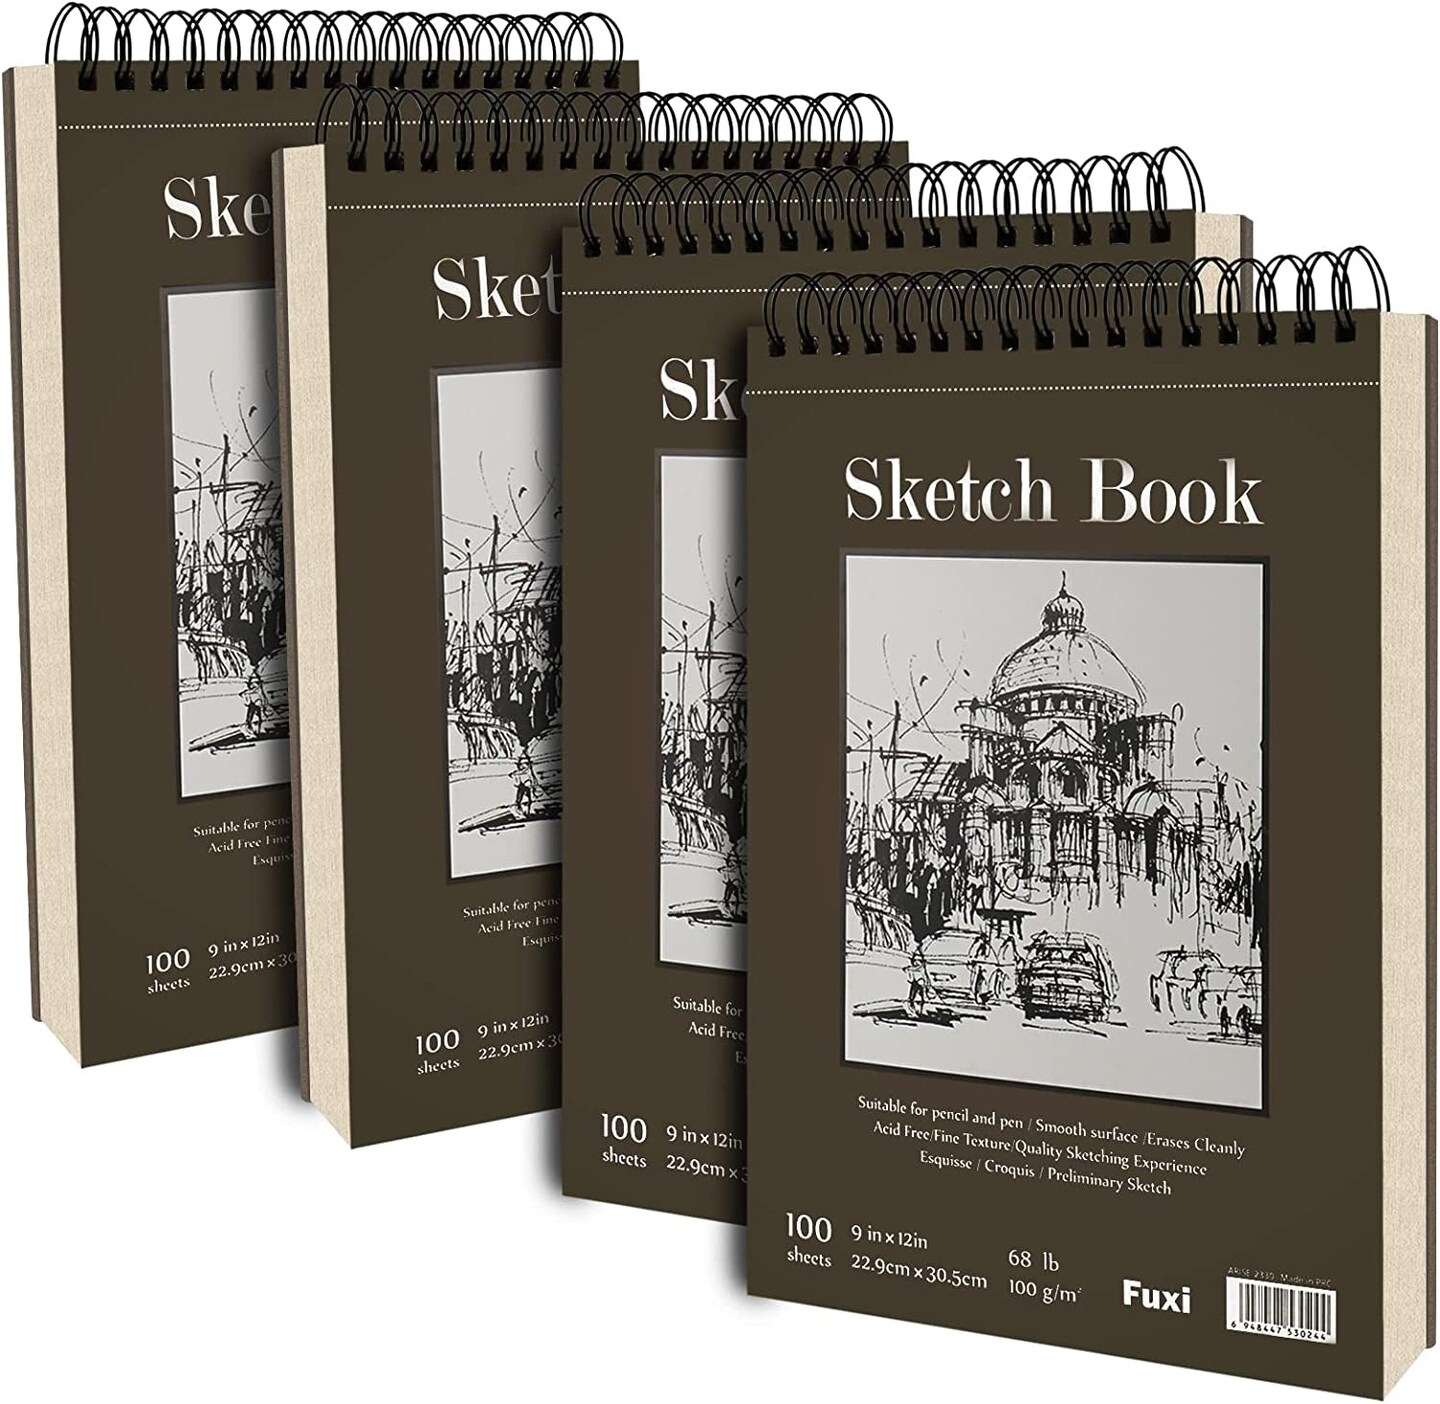 9 x 12 inches Sketch Book, Top Spiral Bound Sketch Pad,1 pack 100-Sheets  (68lb/100gsm),Acid Free Art Sketchbook Artistic Drawing